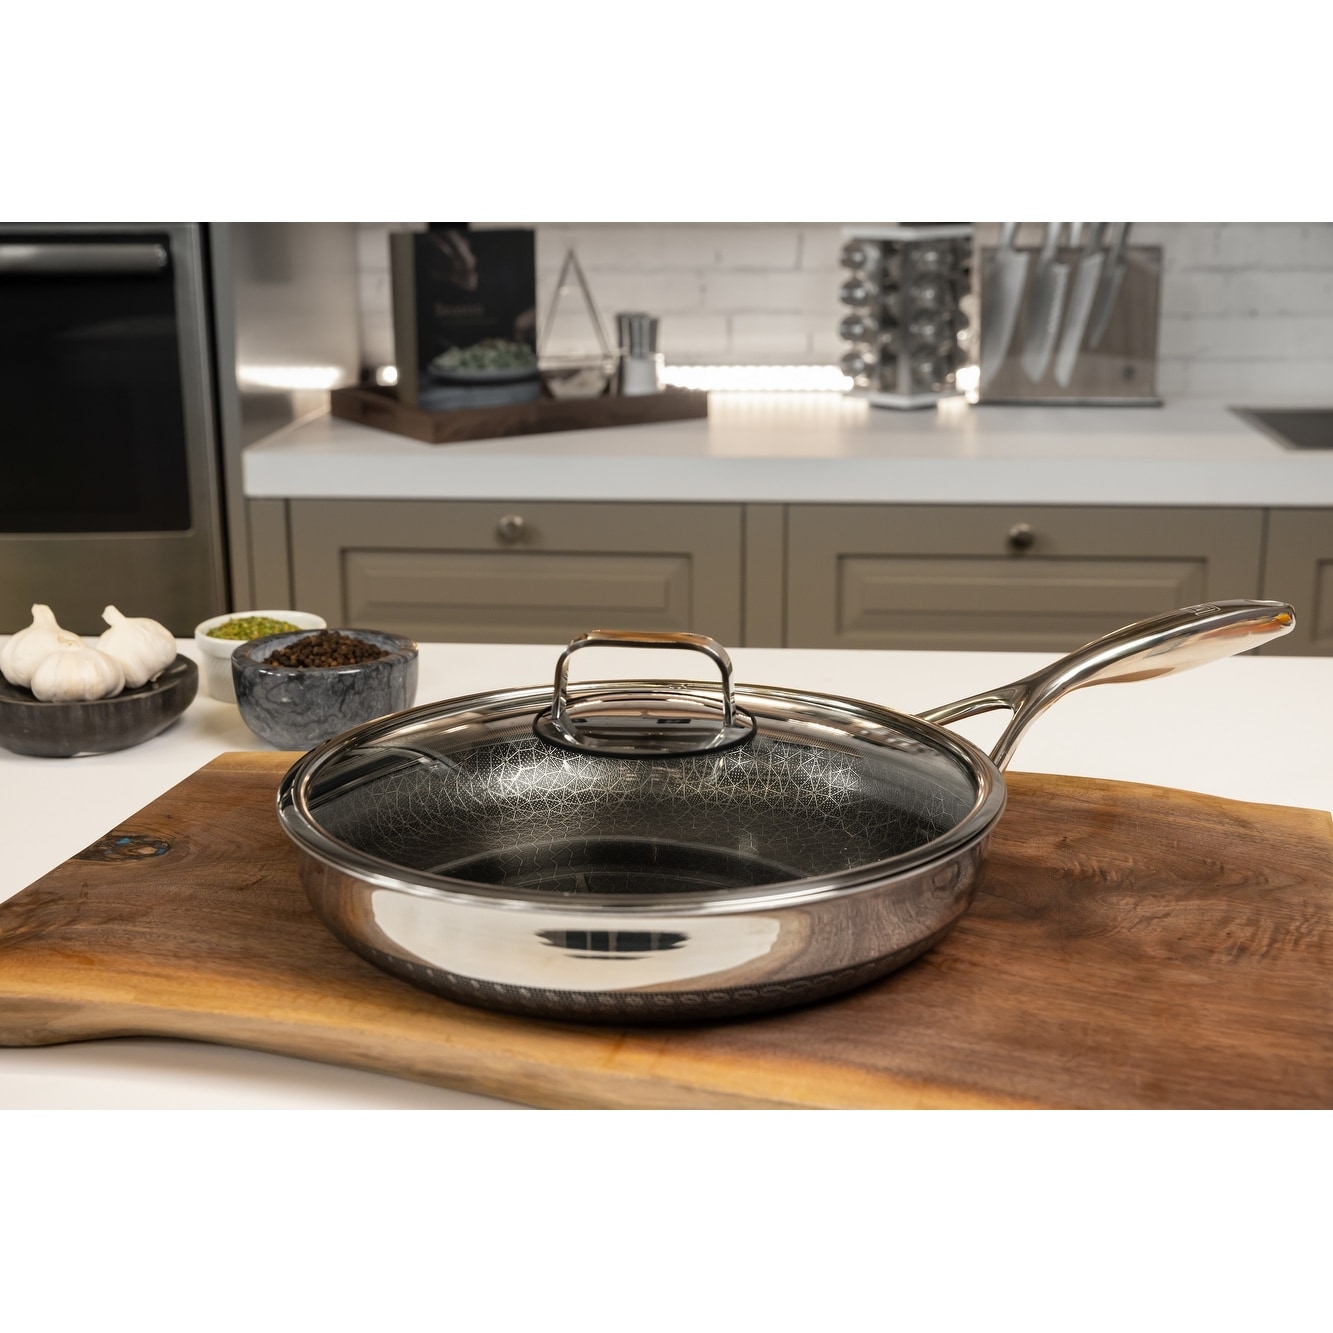 https://ak1.ostkcdn.com/images/products/is/images/direct/0535f706df16226b52d7c355fce579595427d9e5/DiamondClad-by-Livwell-Hybrid-Nonstick-Frying-Pan-Set-with-Tempered-Glass-Lid%2C-Dishwasher-Safe%2C-Cool-Touch-Handle%2C-PFOA-free.jpg